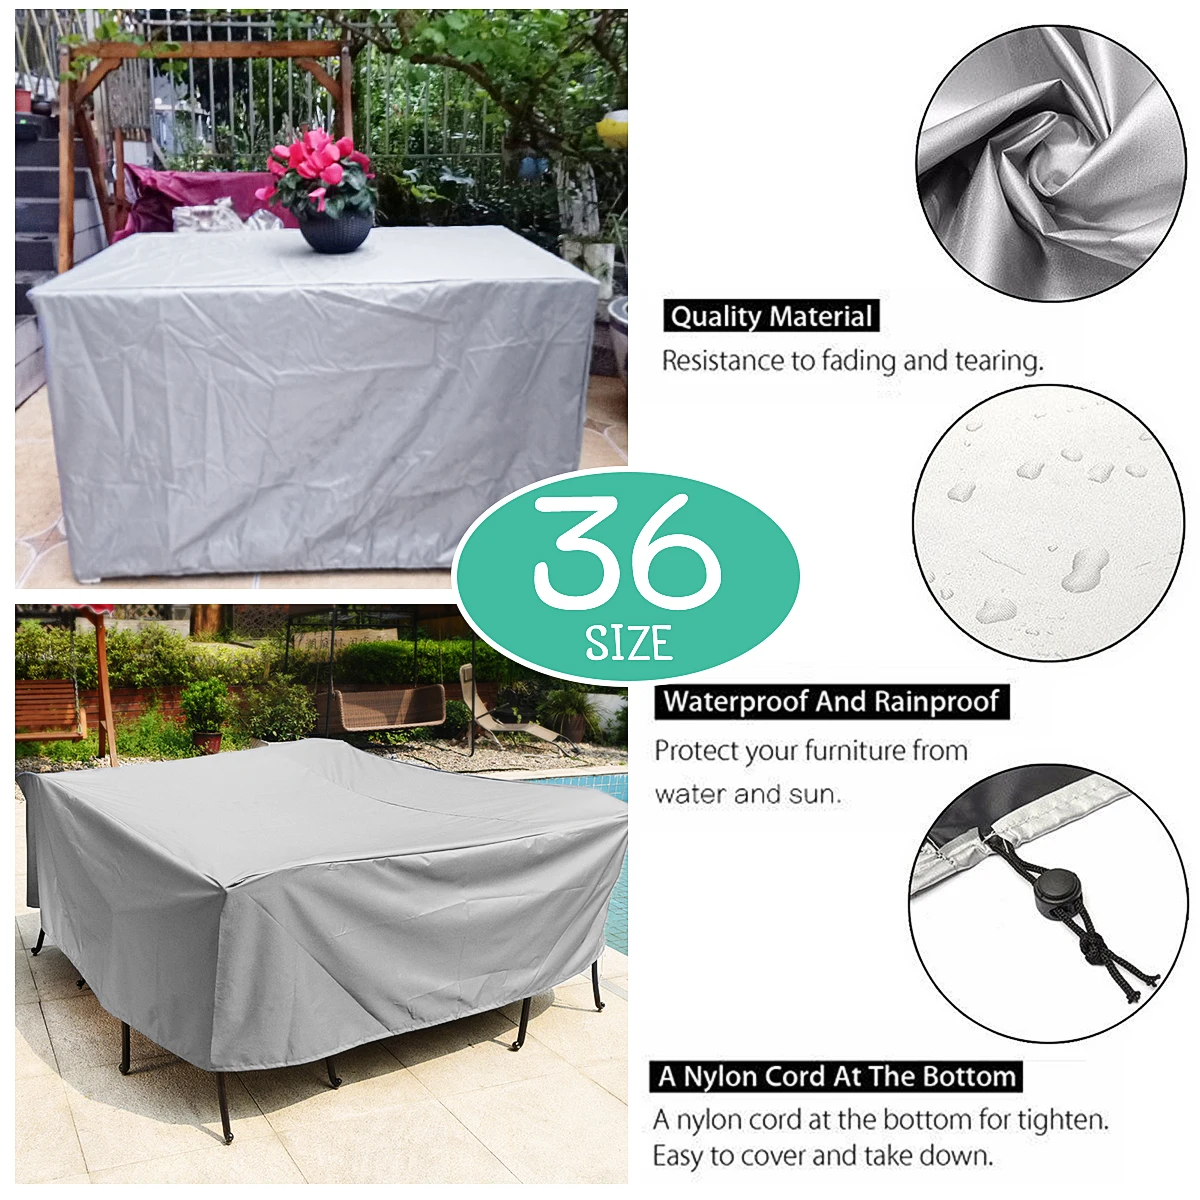 Details about   Patio Chair Covers Outdoor Garden Waterproof Furniture Dust Rain UV Protection 